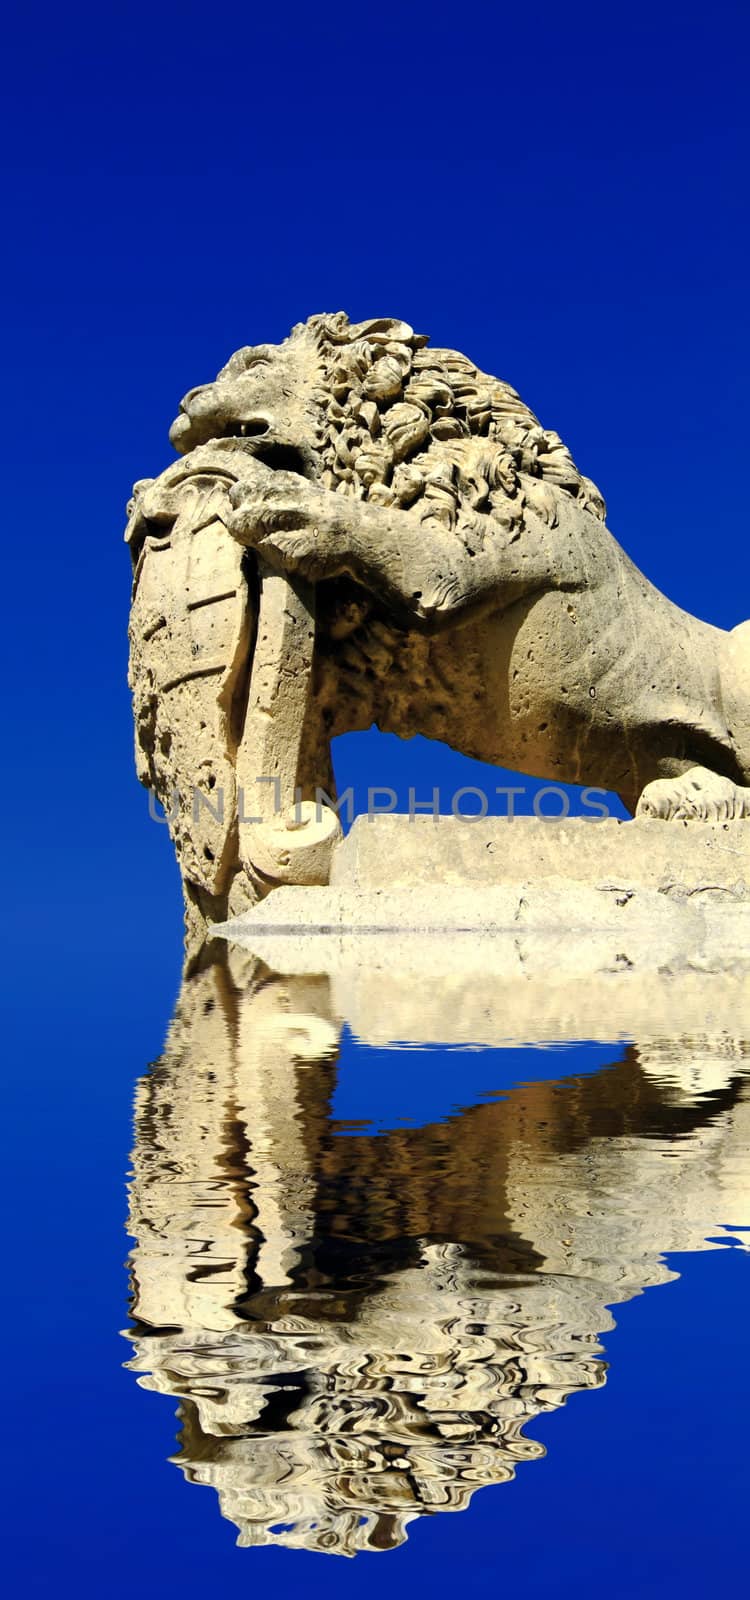 Medieval stone sculpture of lion guarding the gates of the old city of Mdina in Malta